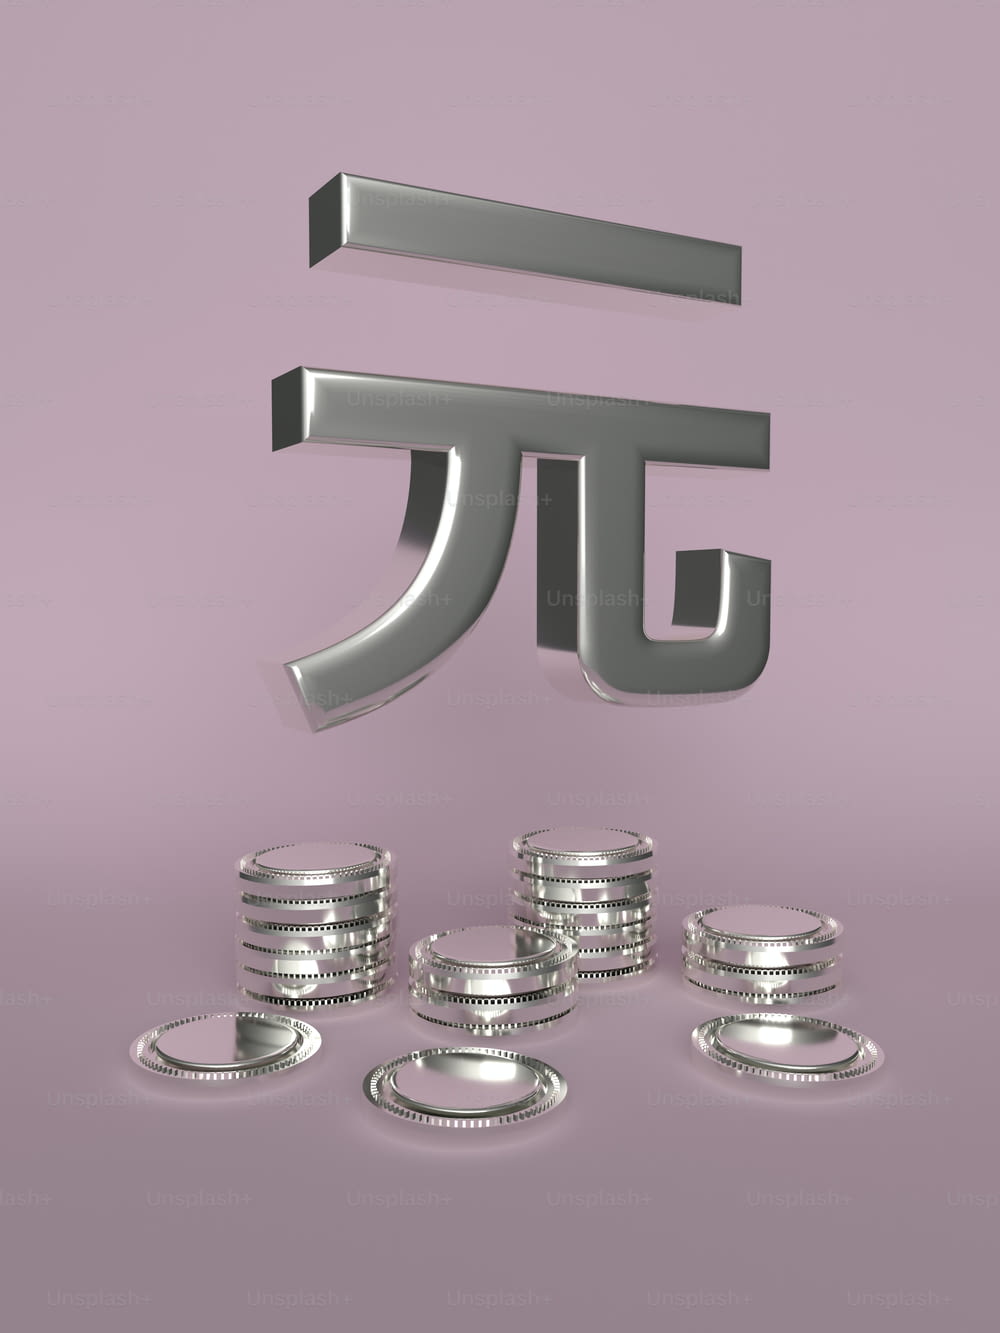 a pile of silver coins sitting next to a pi symbol